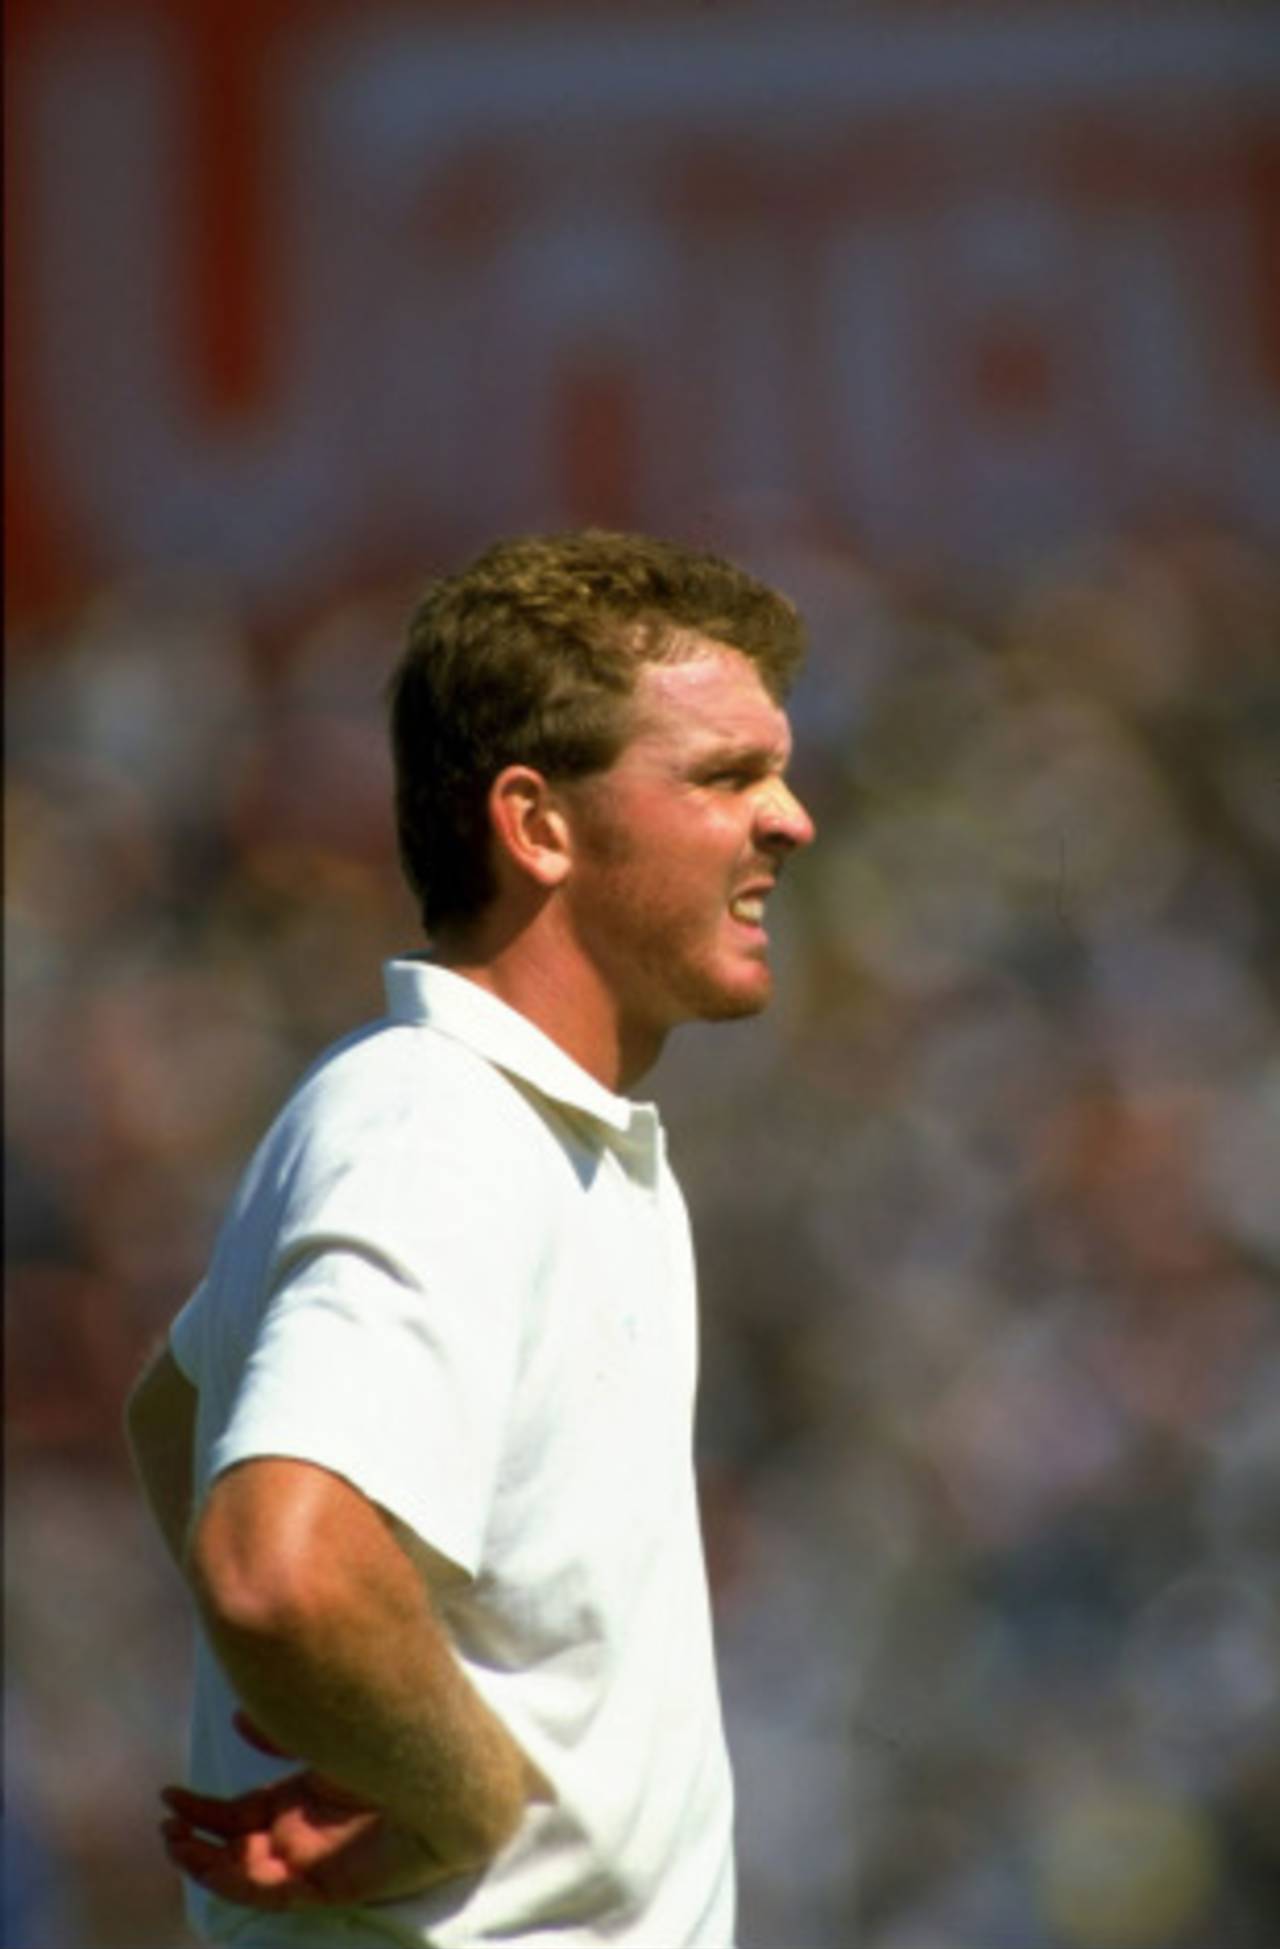 Craig McDermott was the top wicket-taker in the 1987 World Cup with 18 wickets